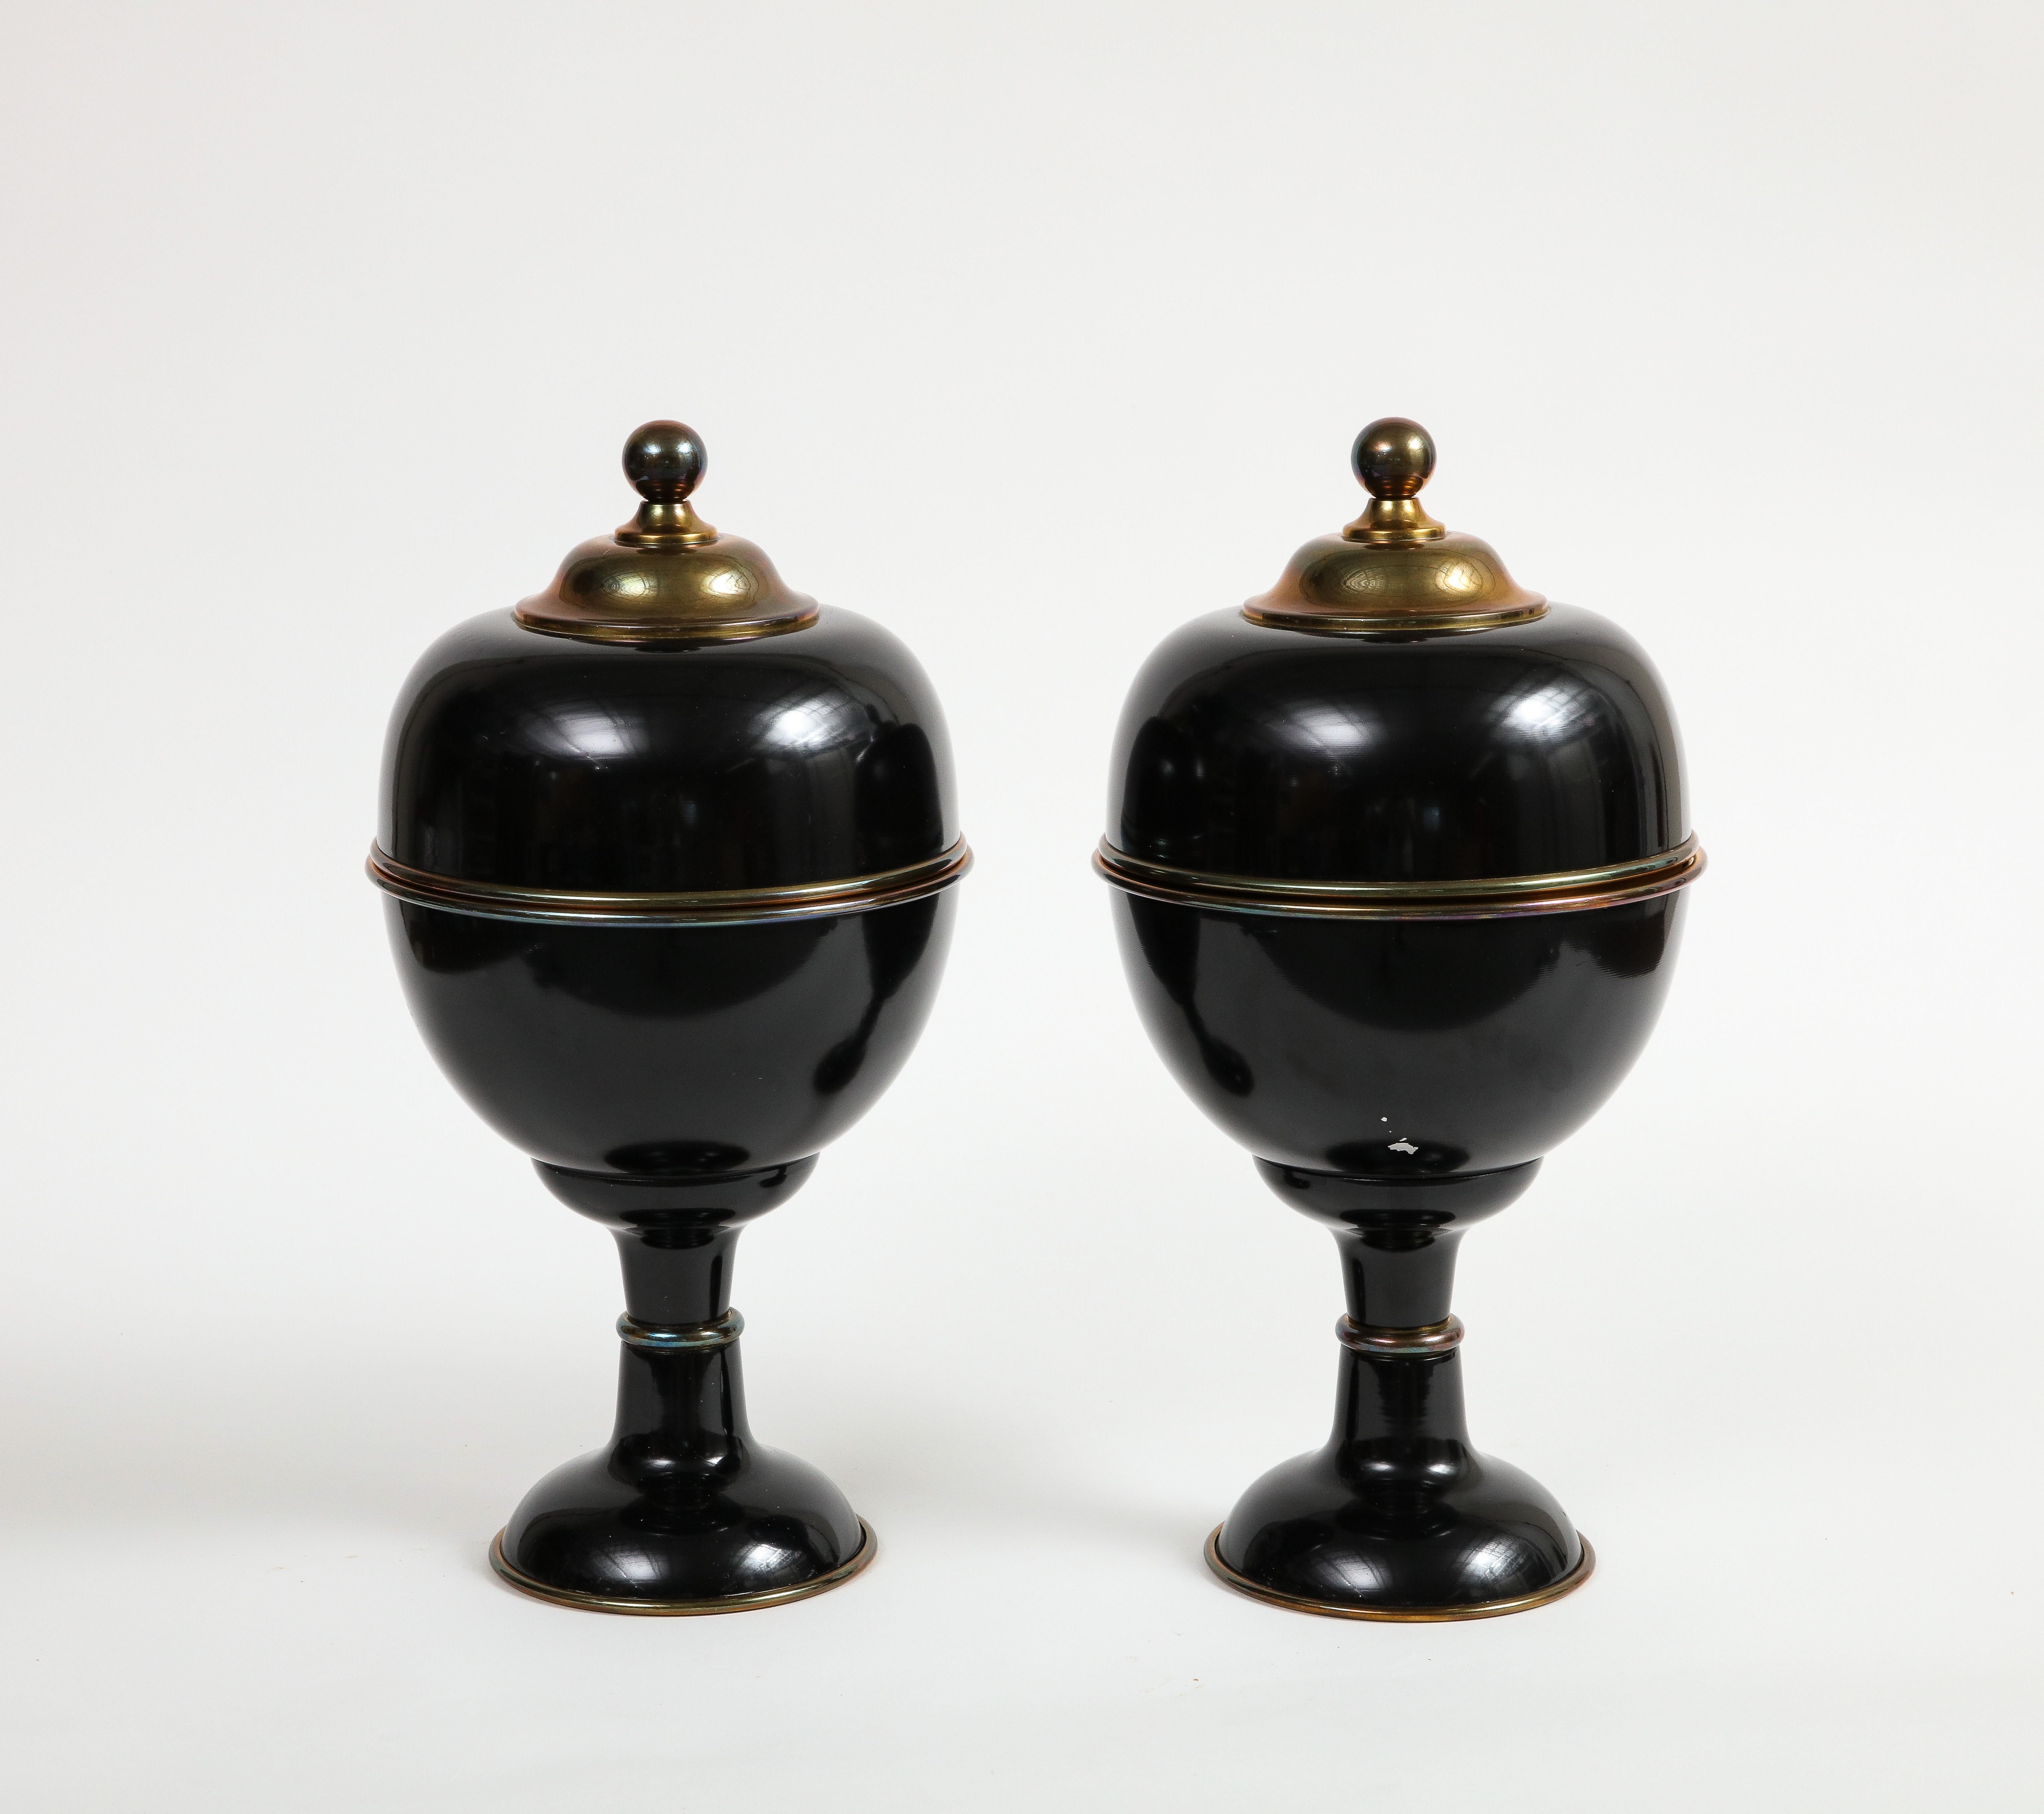 Pair of Large Decorative Black Enamel Urns with Brass Detail For Sale 1